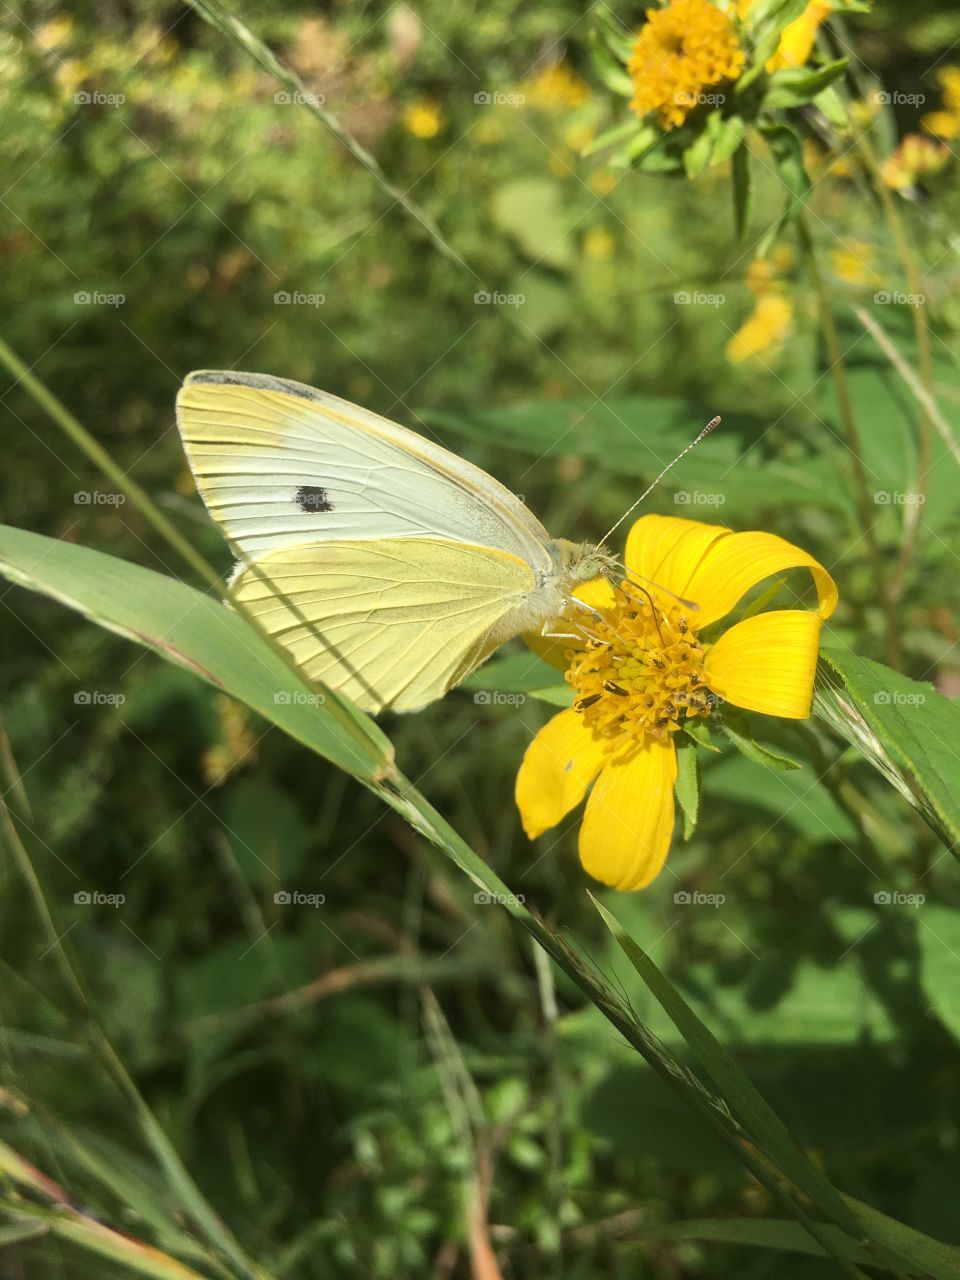 Cabbage white butterfly feeding on a yellow flower 